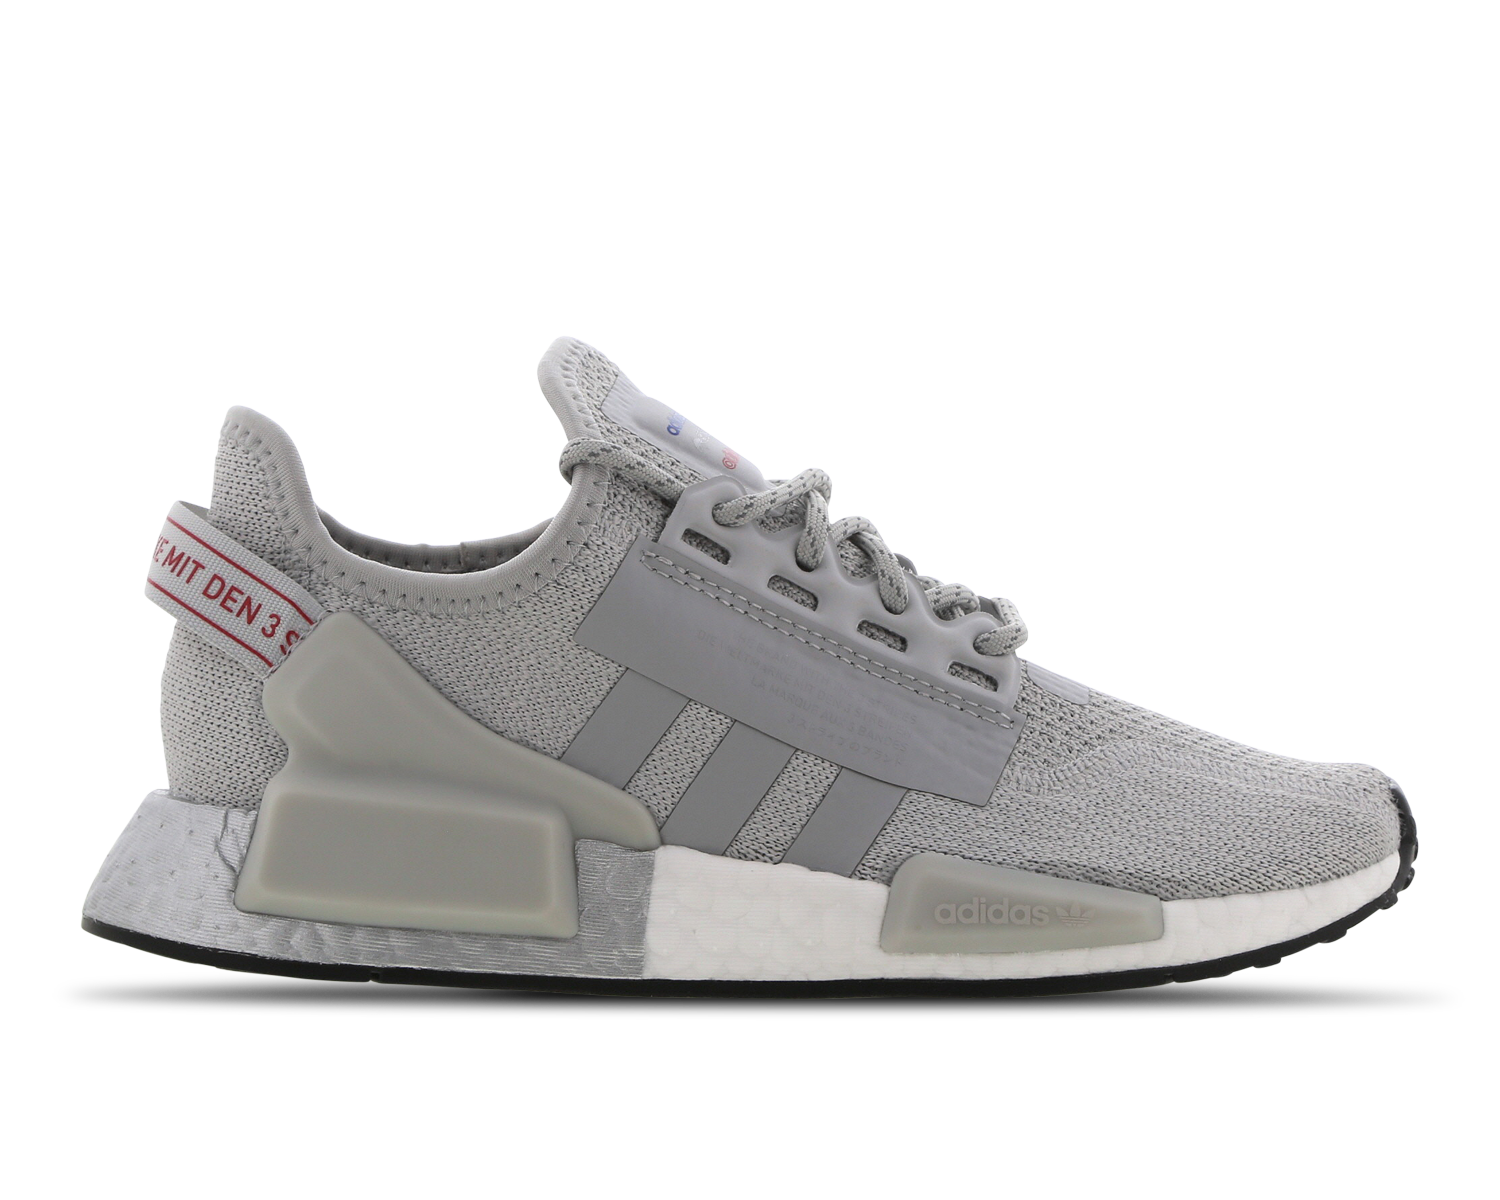 Cheap Adidas nmd nomad NMD R1 PK Primeknit Olive Camo Size 8